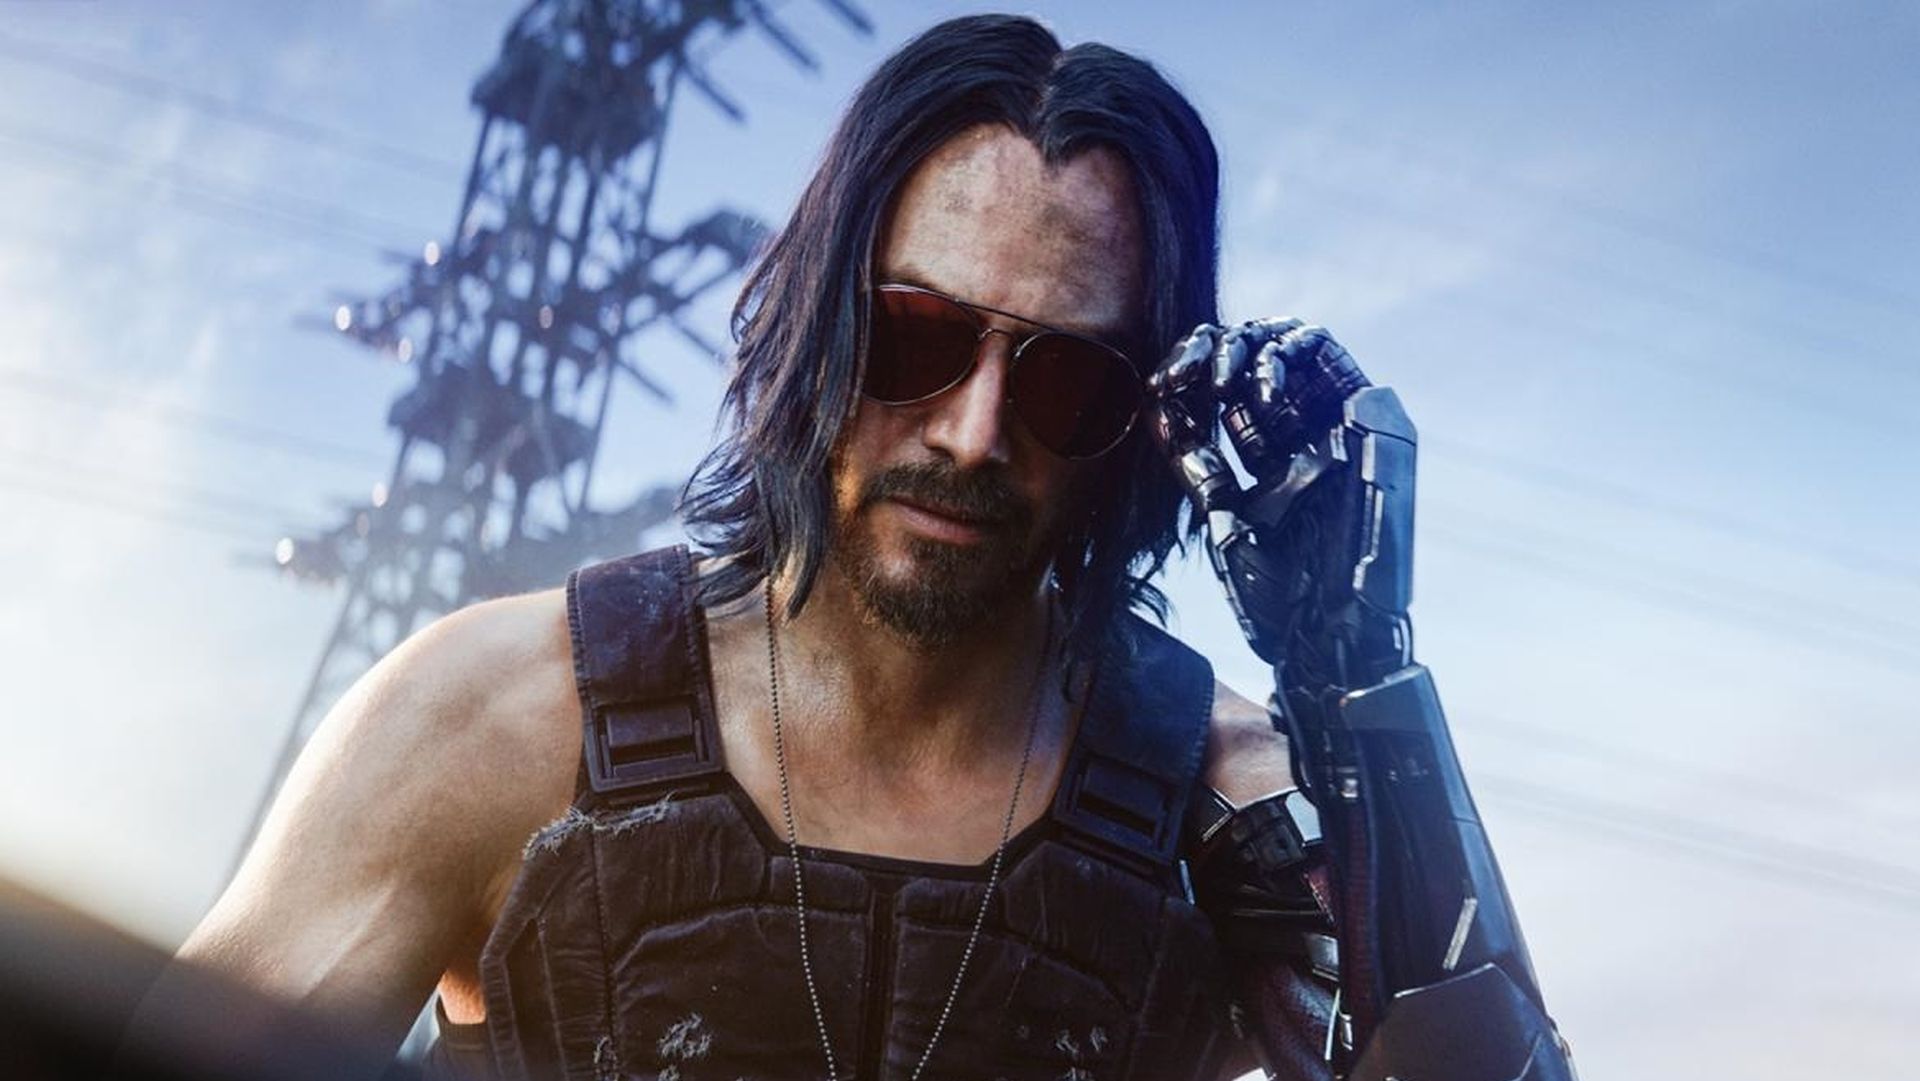 Cyberpunk 2077 has been reintroduced to the PlayStation